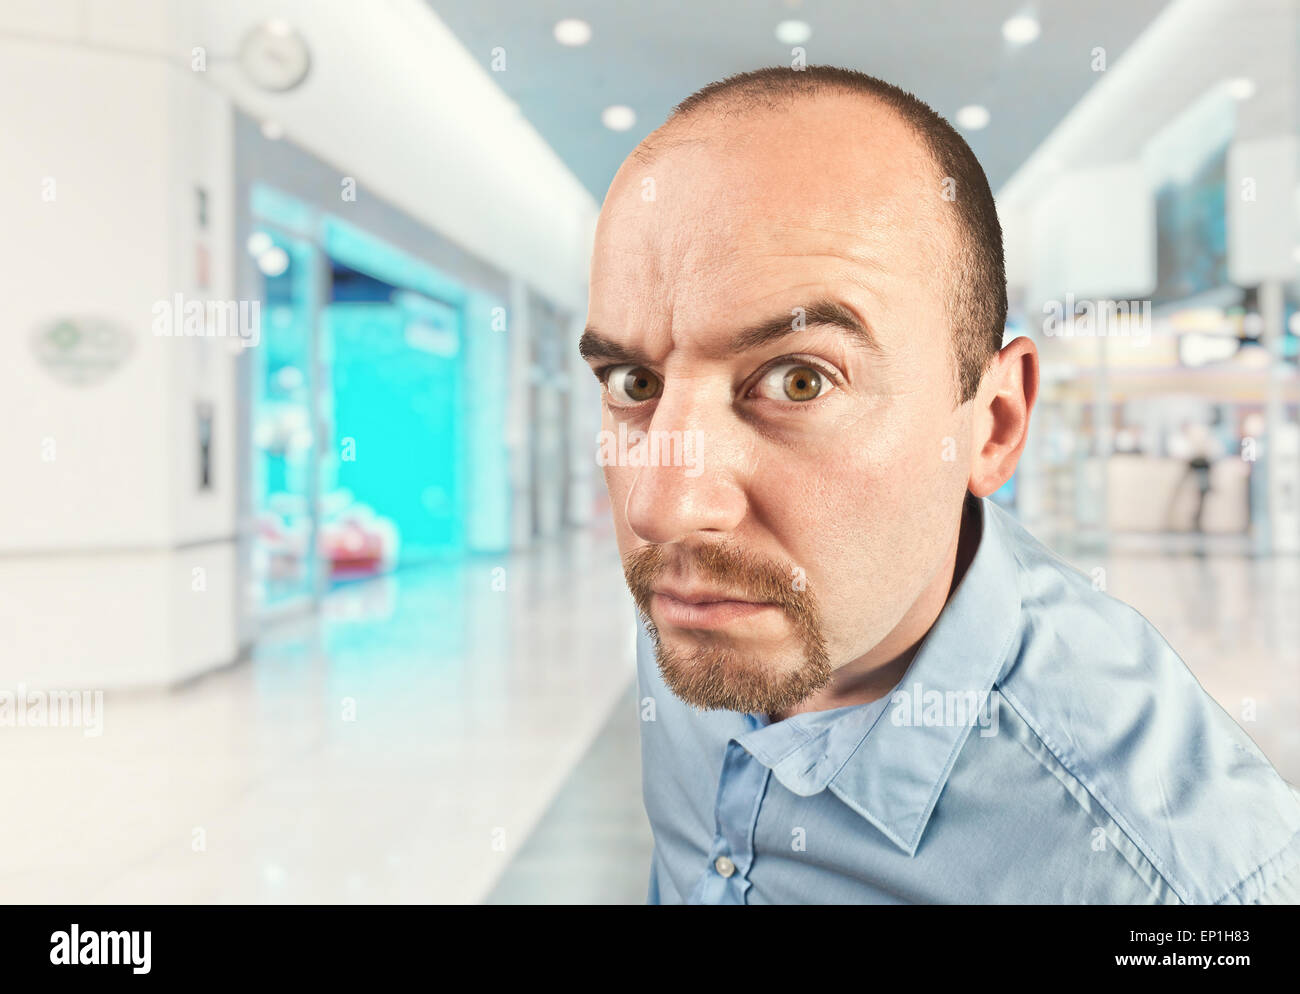 portrait of man and indoor background Stock Photo